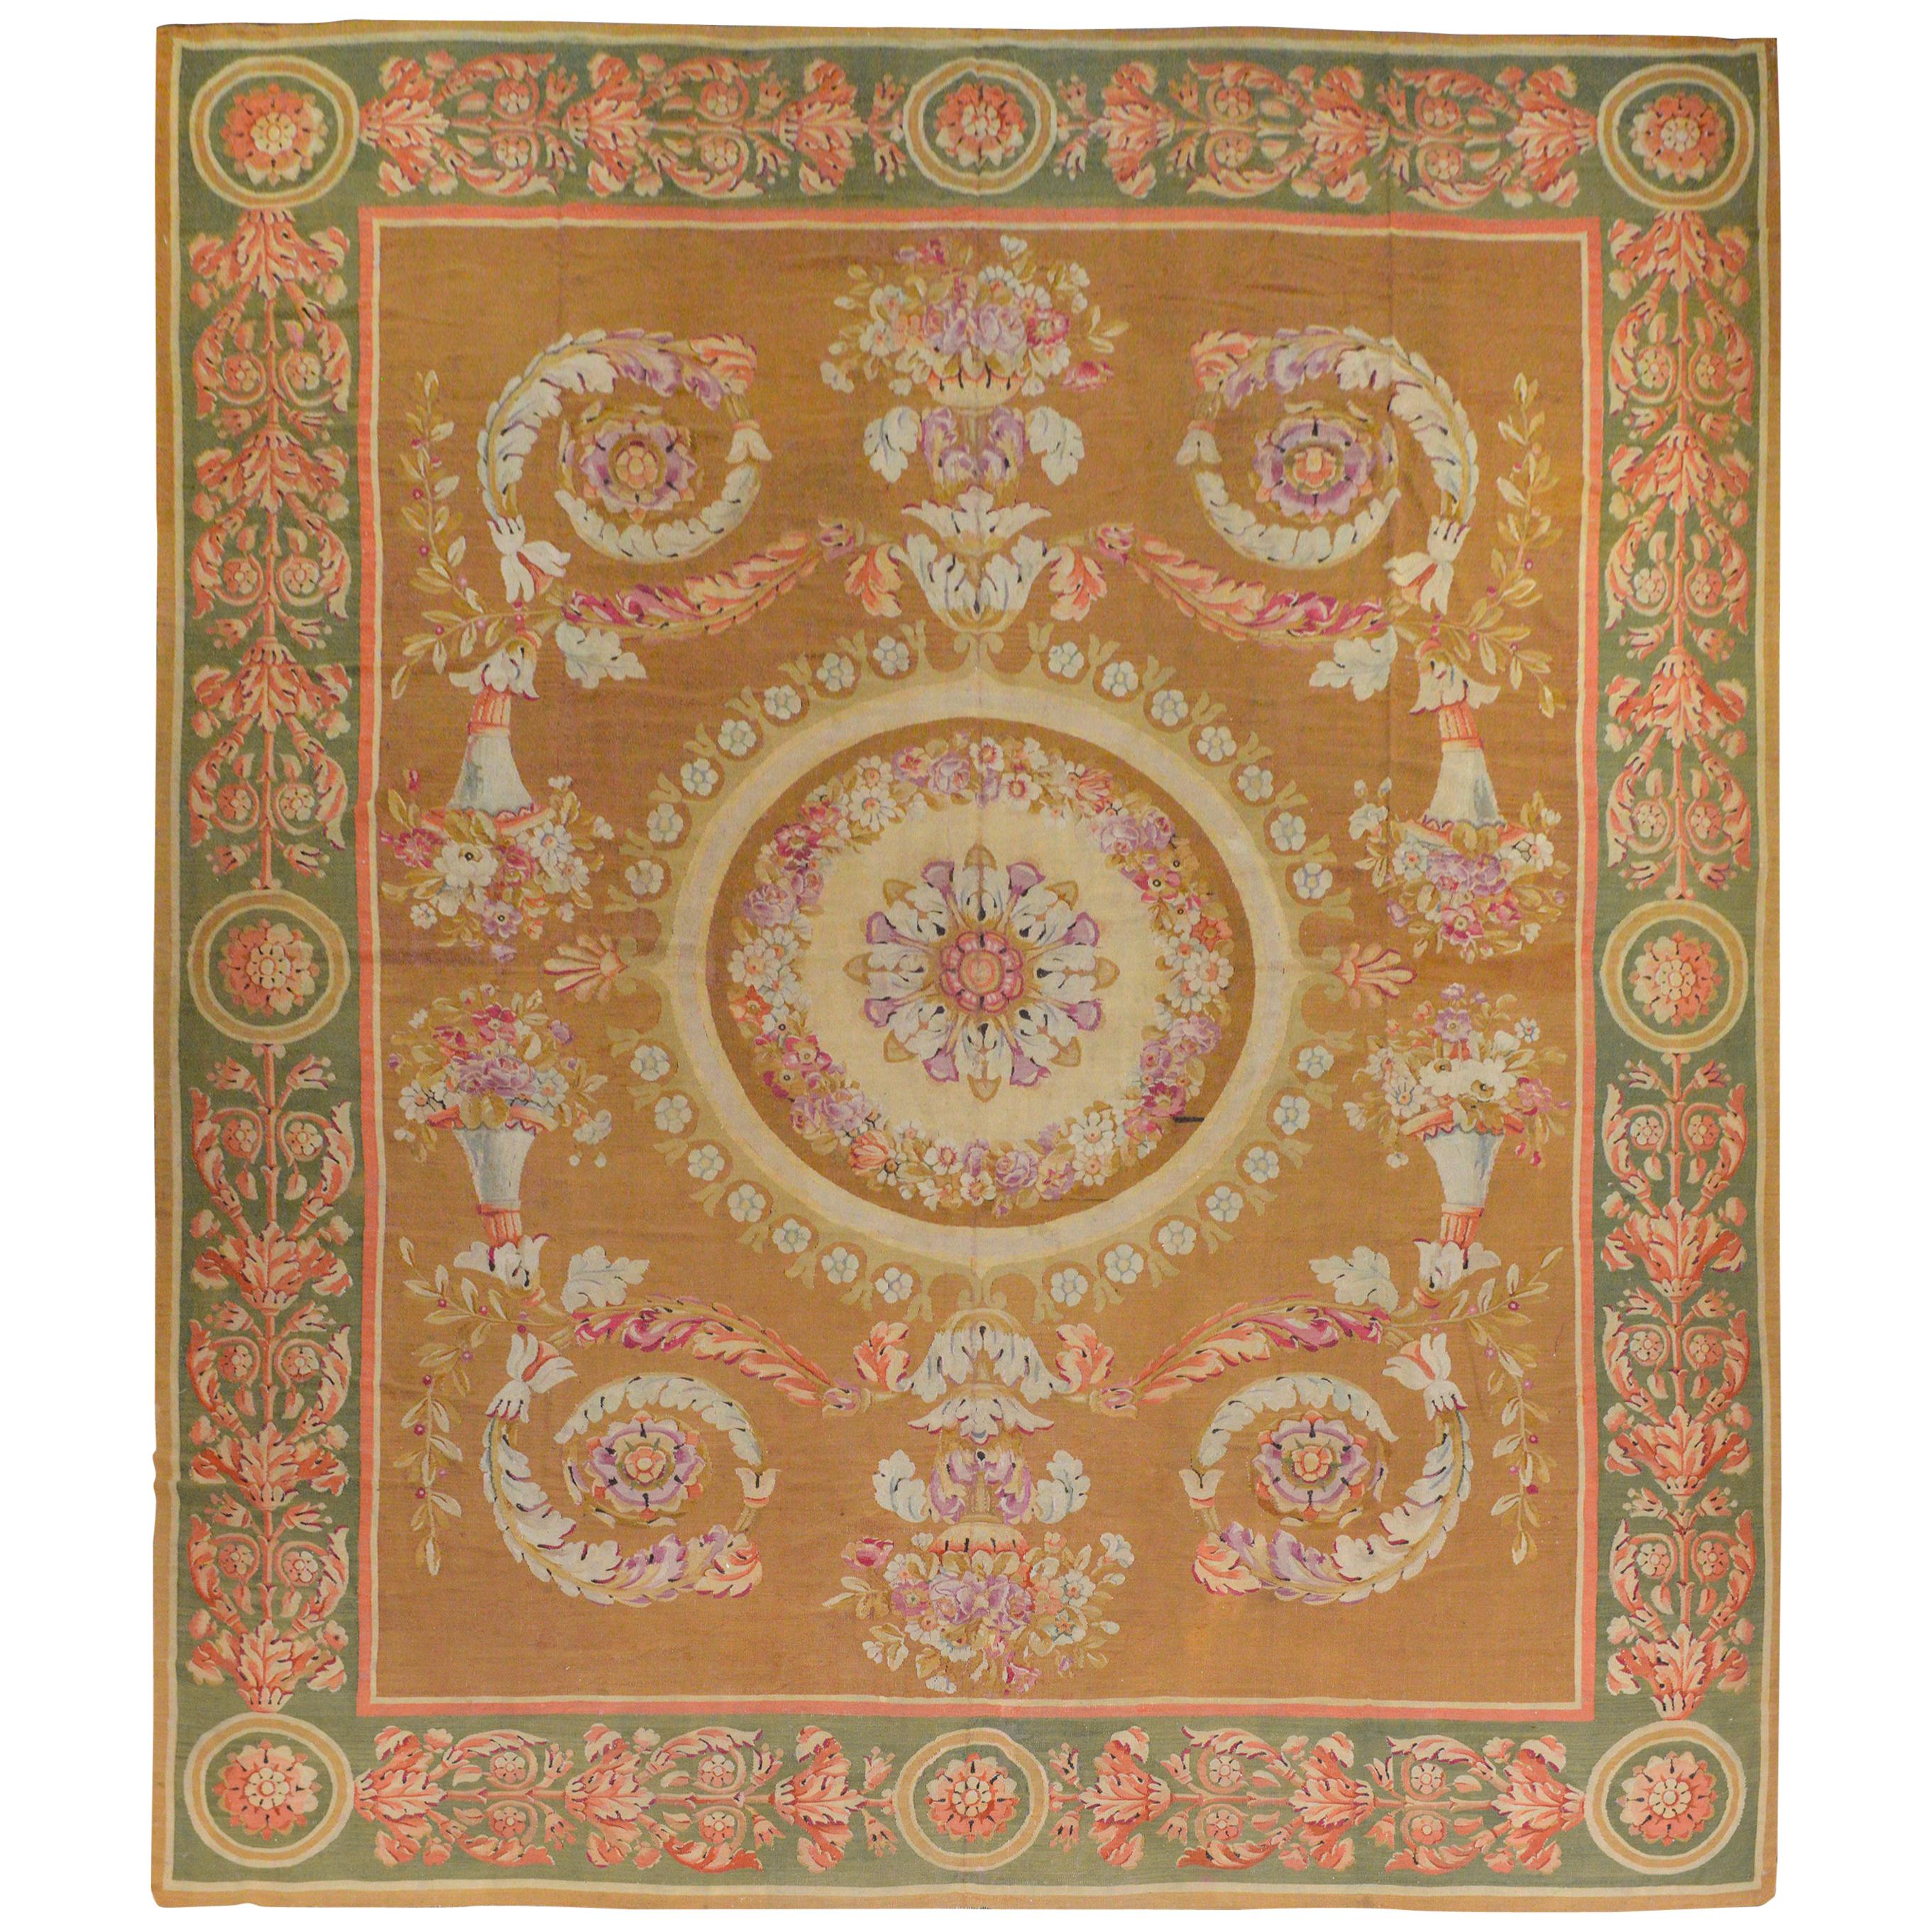 Outstanding 19th Century French Aubusson Rug